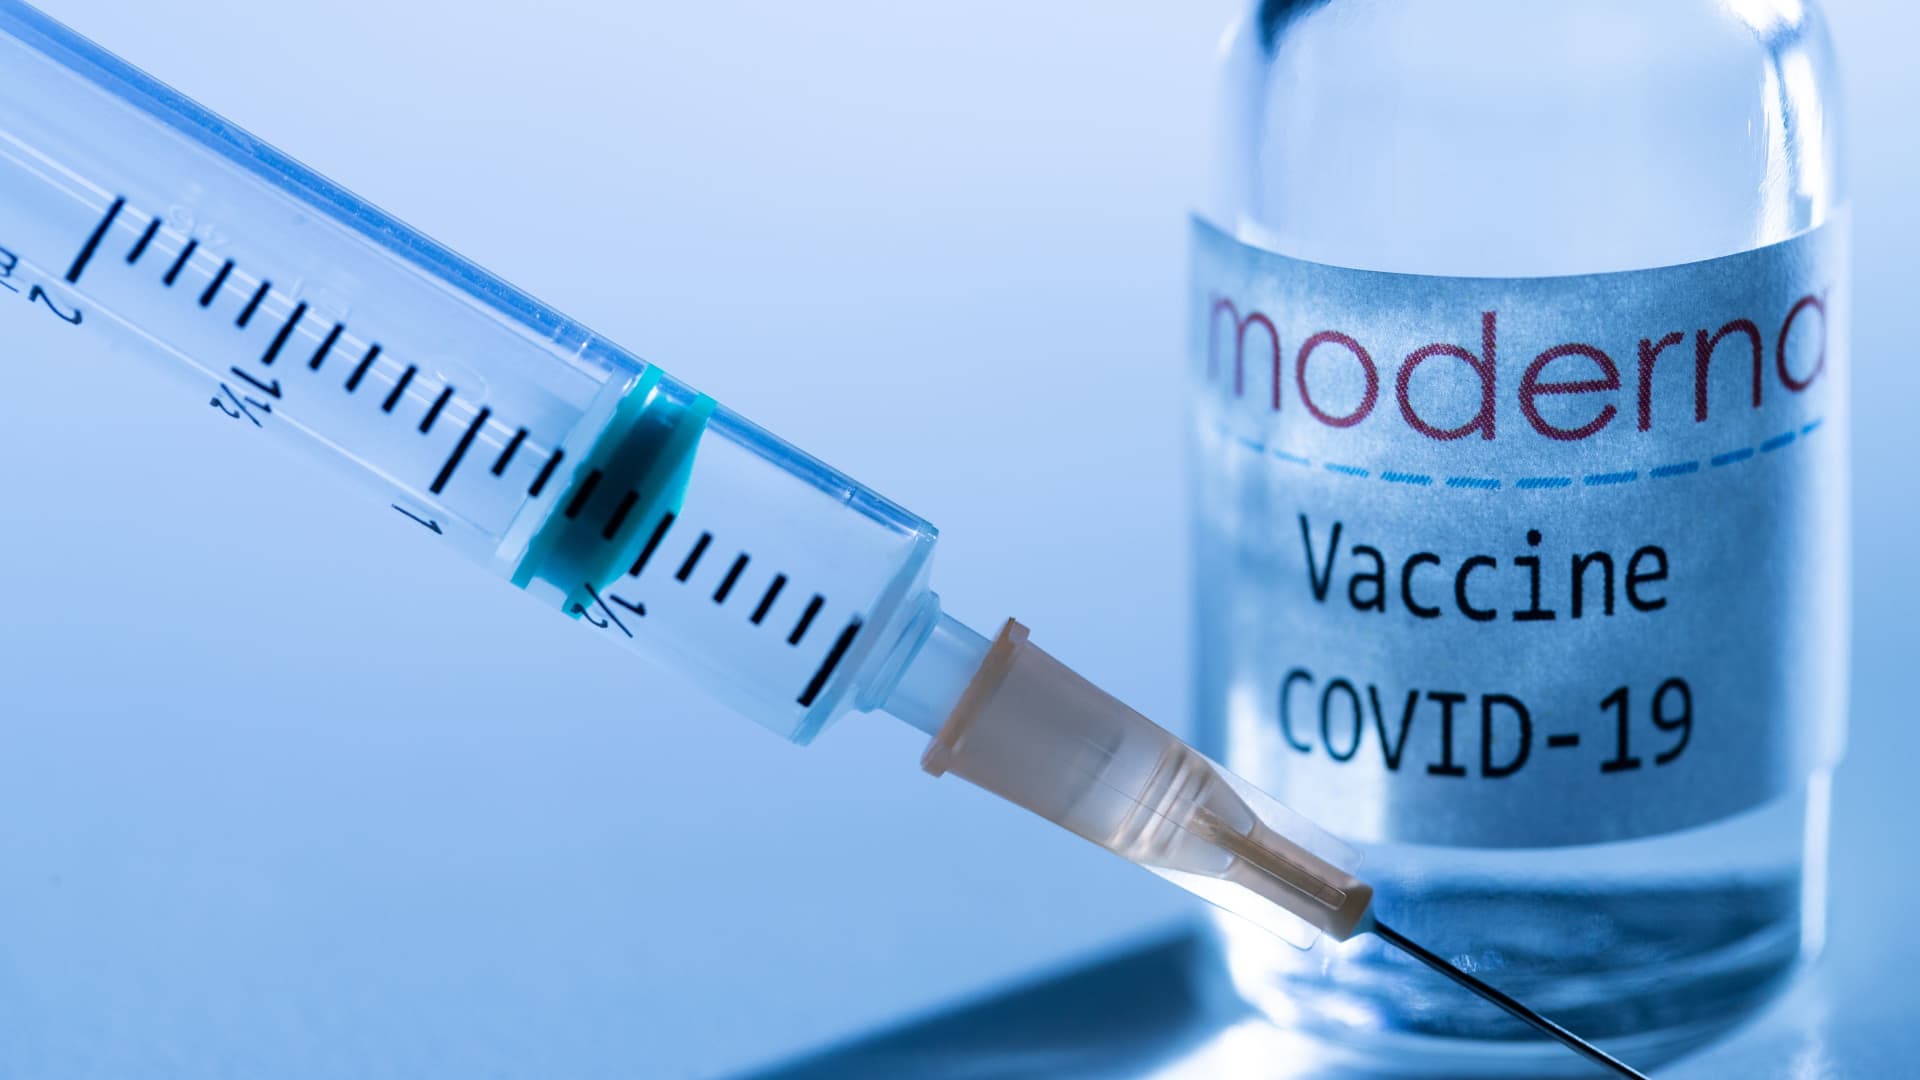 This creative image taken in a studio in Paris on November 16, 2020, showing a syringe and a vaccine vial with the reproducted logo of a US biotech firm Moderna, illustrates the announcement of an experimental vaccine against Covid-19 from Moderna that would be nearly 95% effective, marking a second major step forward in the quest to end the Covid-19 pandemic.